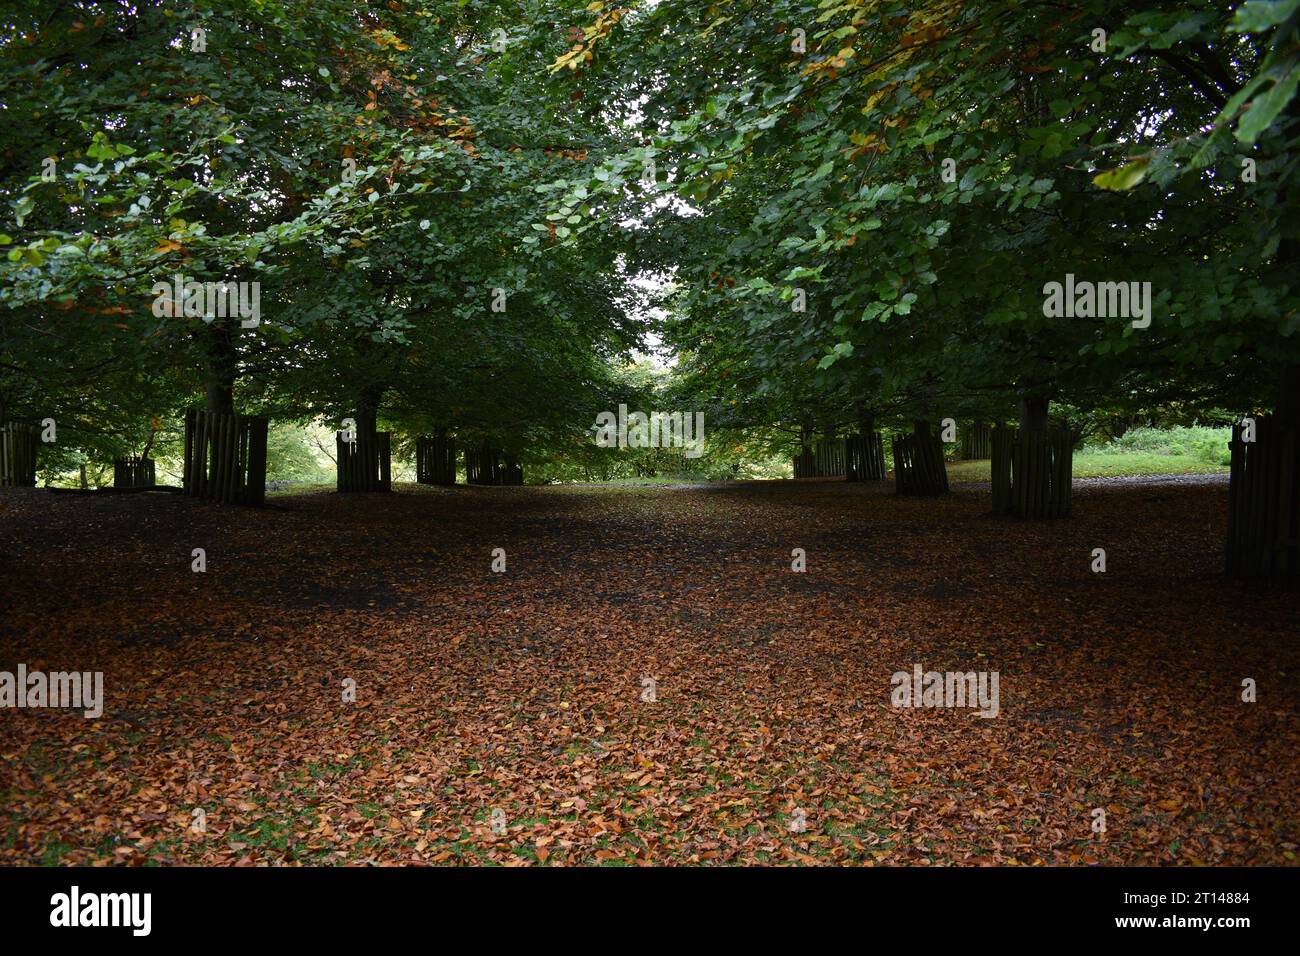 An area of thick low trees in a park with a thin carpet of dead leaves underneath them at the beginning of autumn. Stock Photo